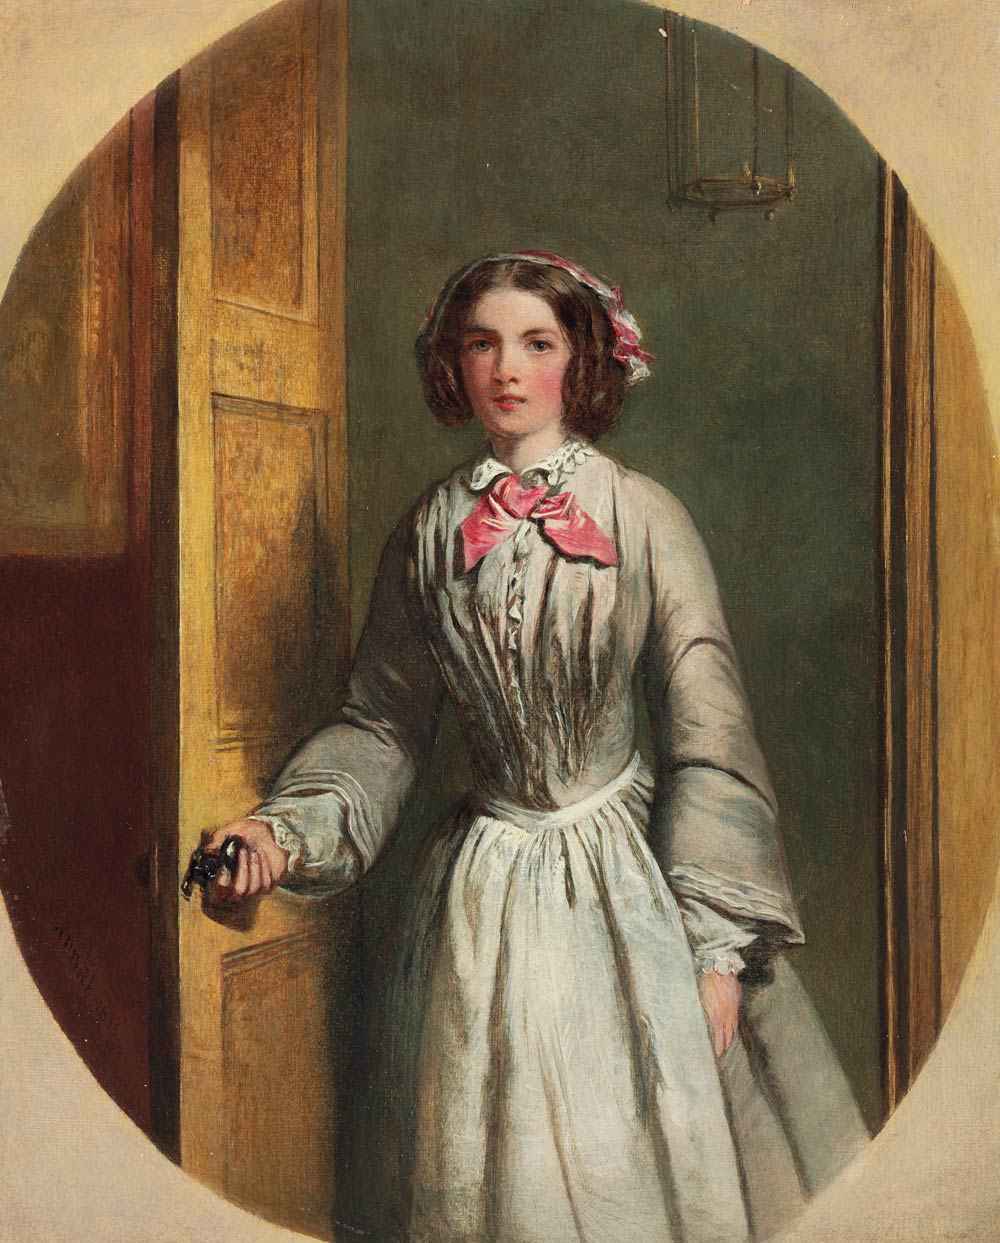 Did you ring sir - William Powell Frith